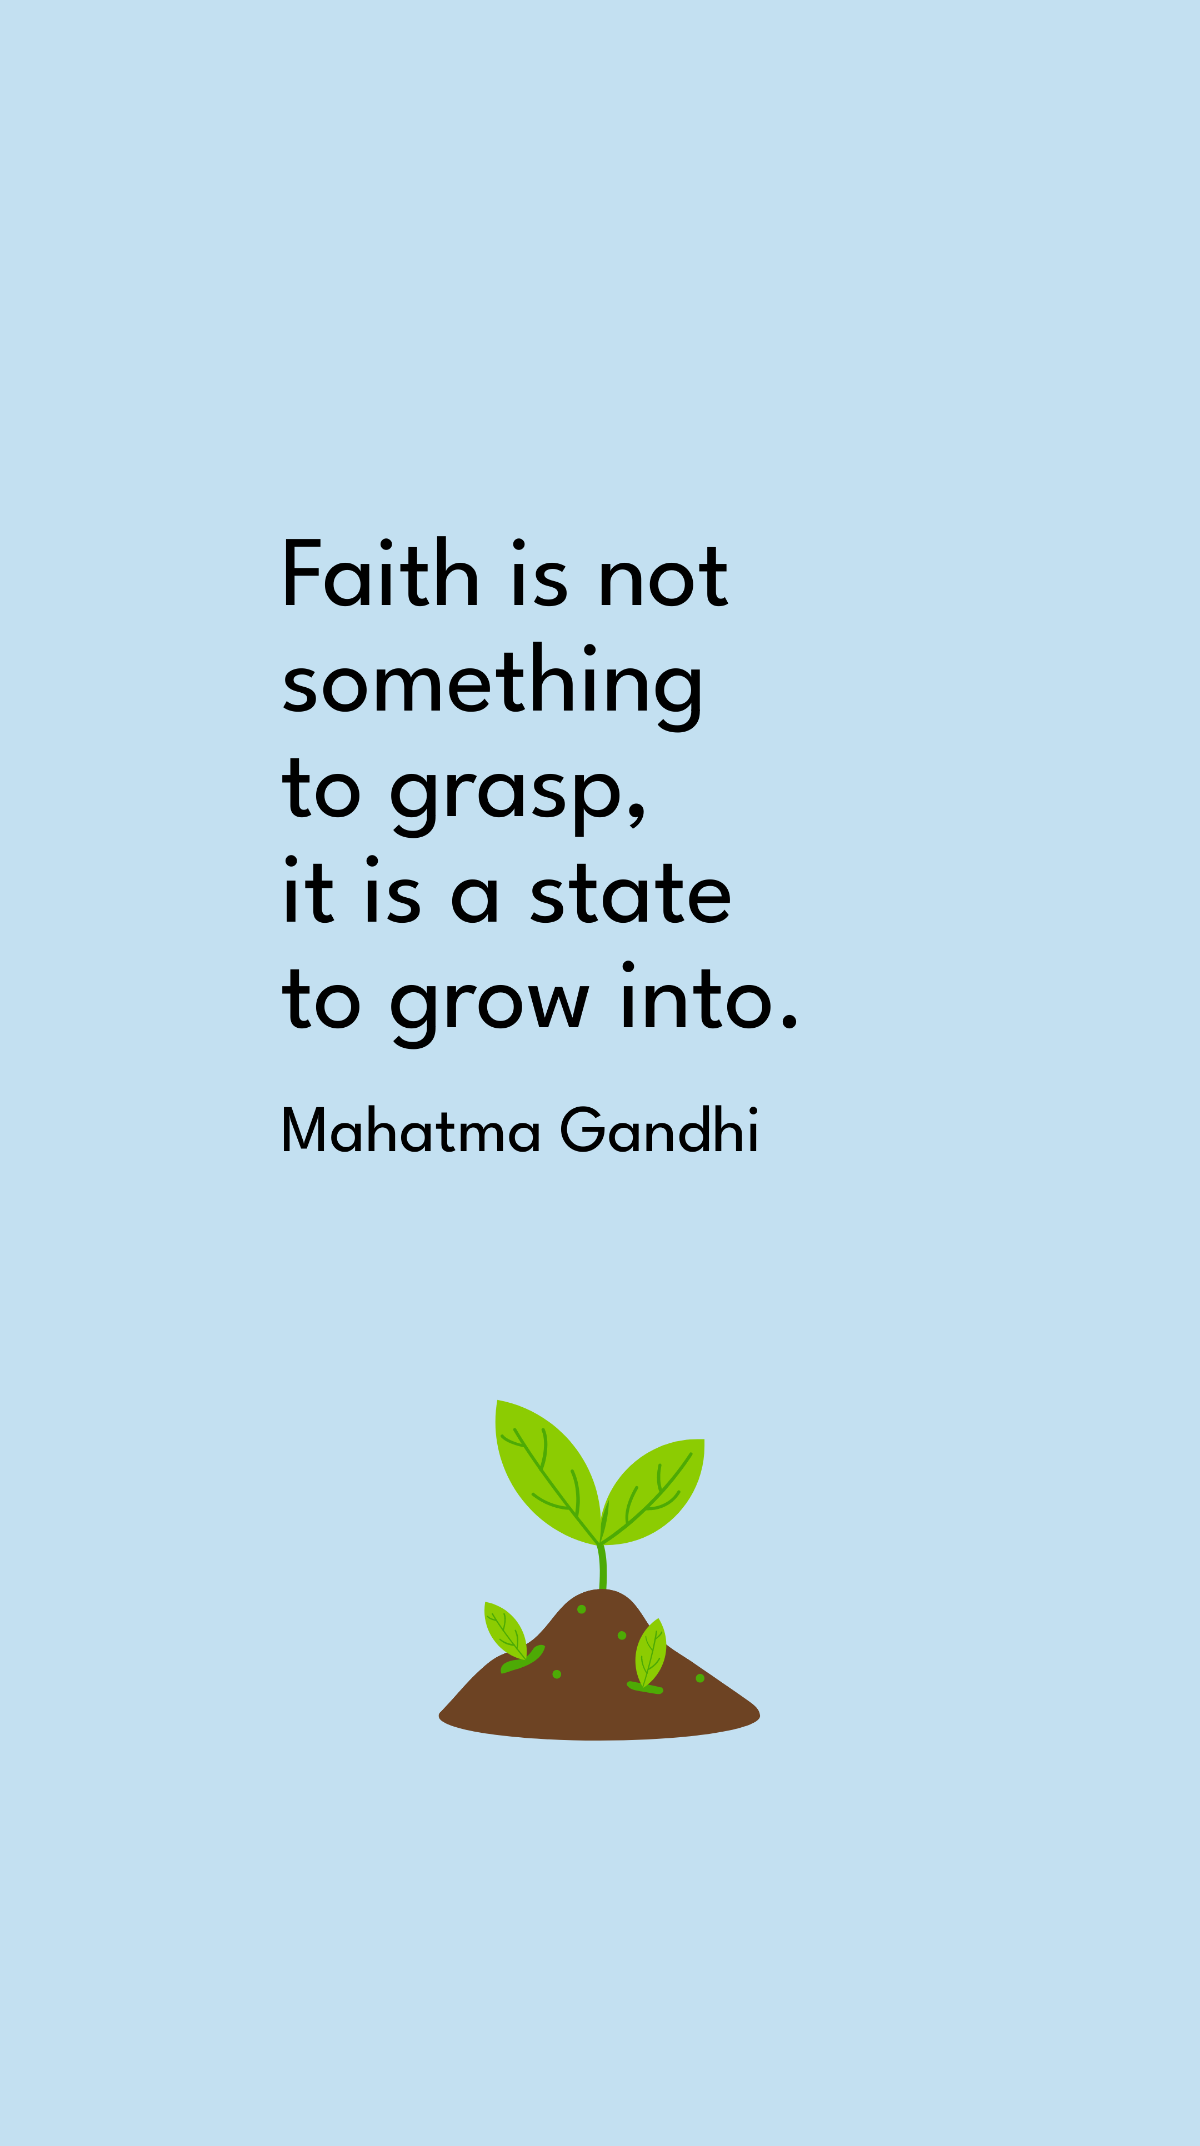 Mahatma Gandhi - Faith is not something to grasp, it is a state to grow into.